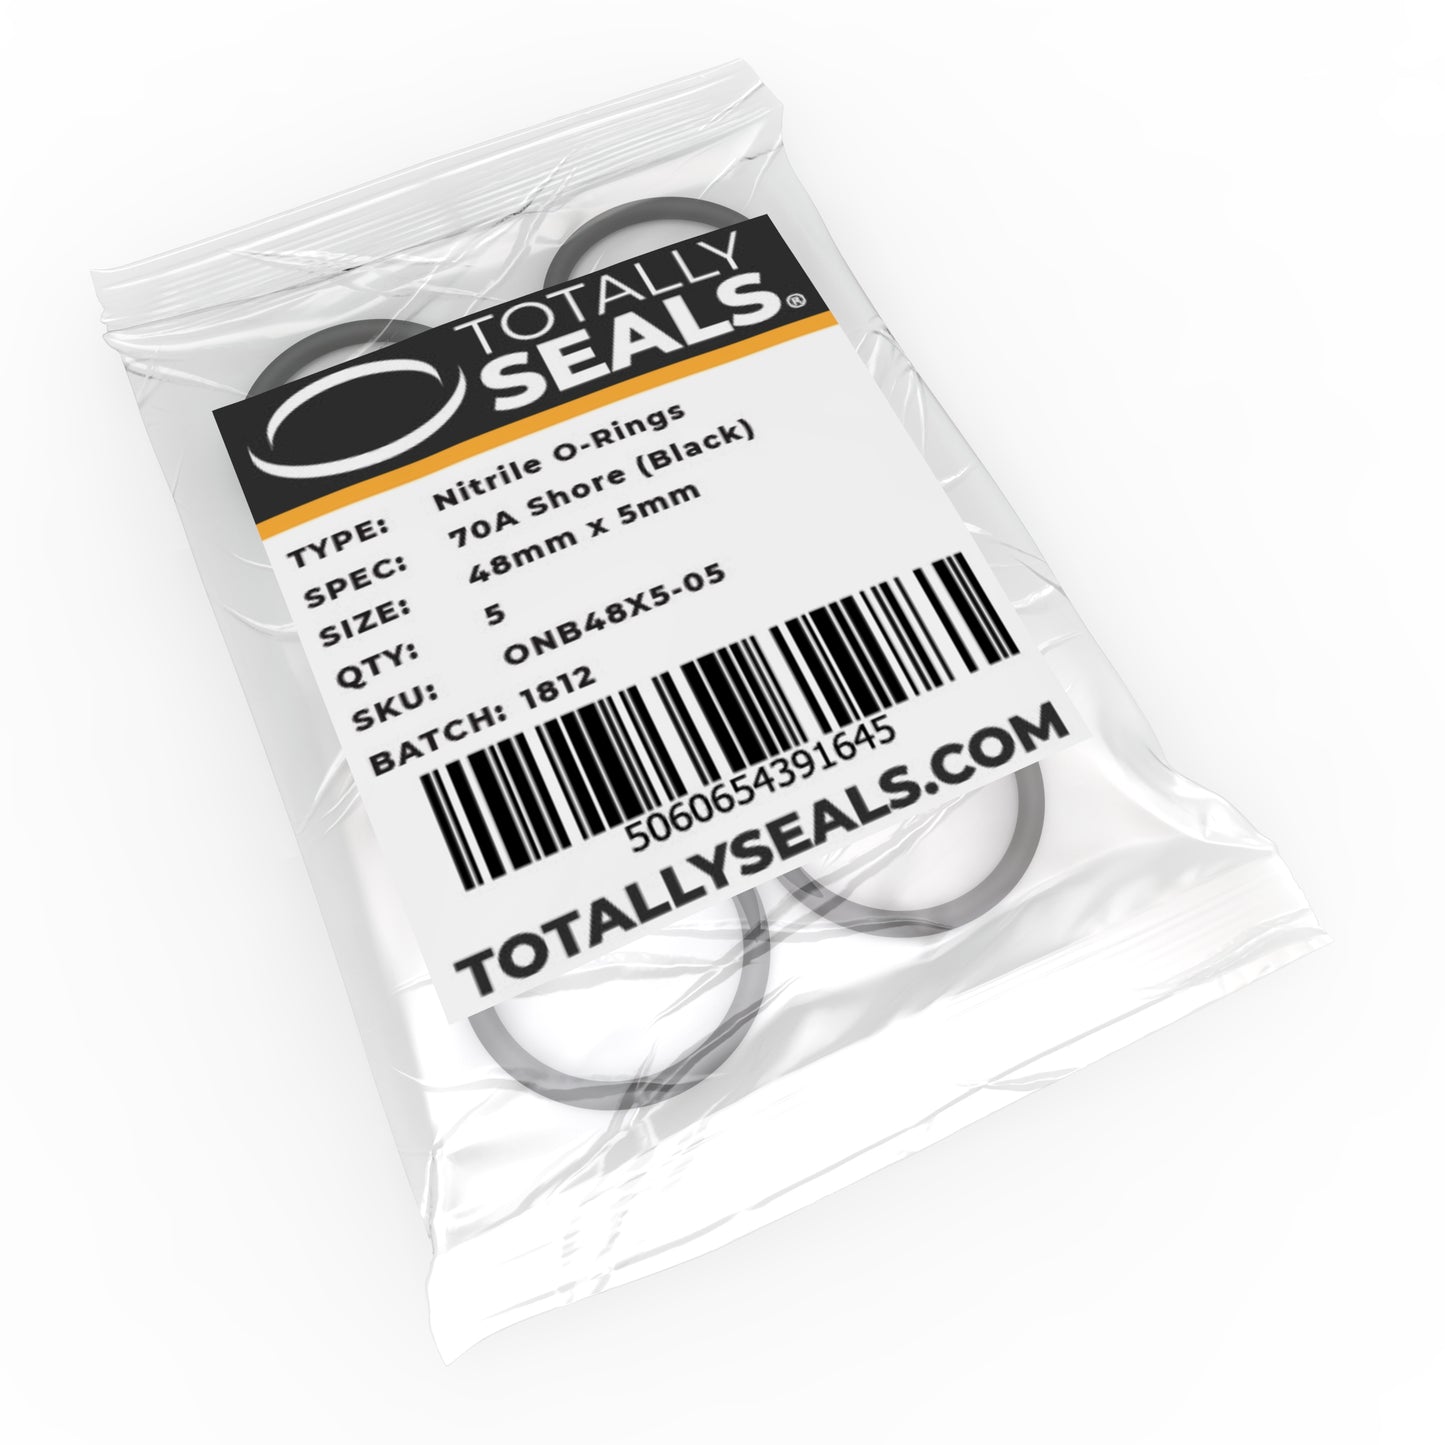 48mm x 5mm (58mm OD) Nitrile O-Rings - Totally Seals®